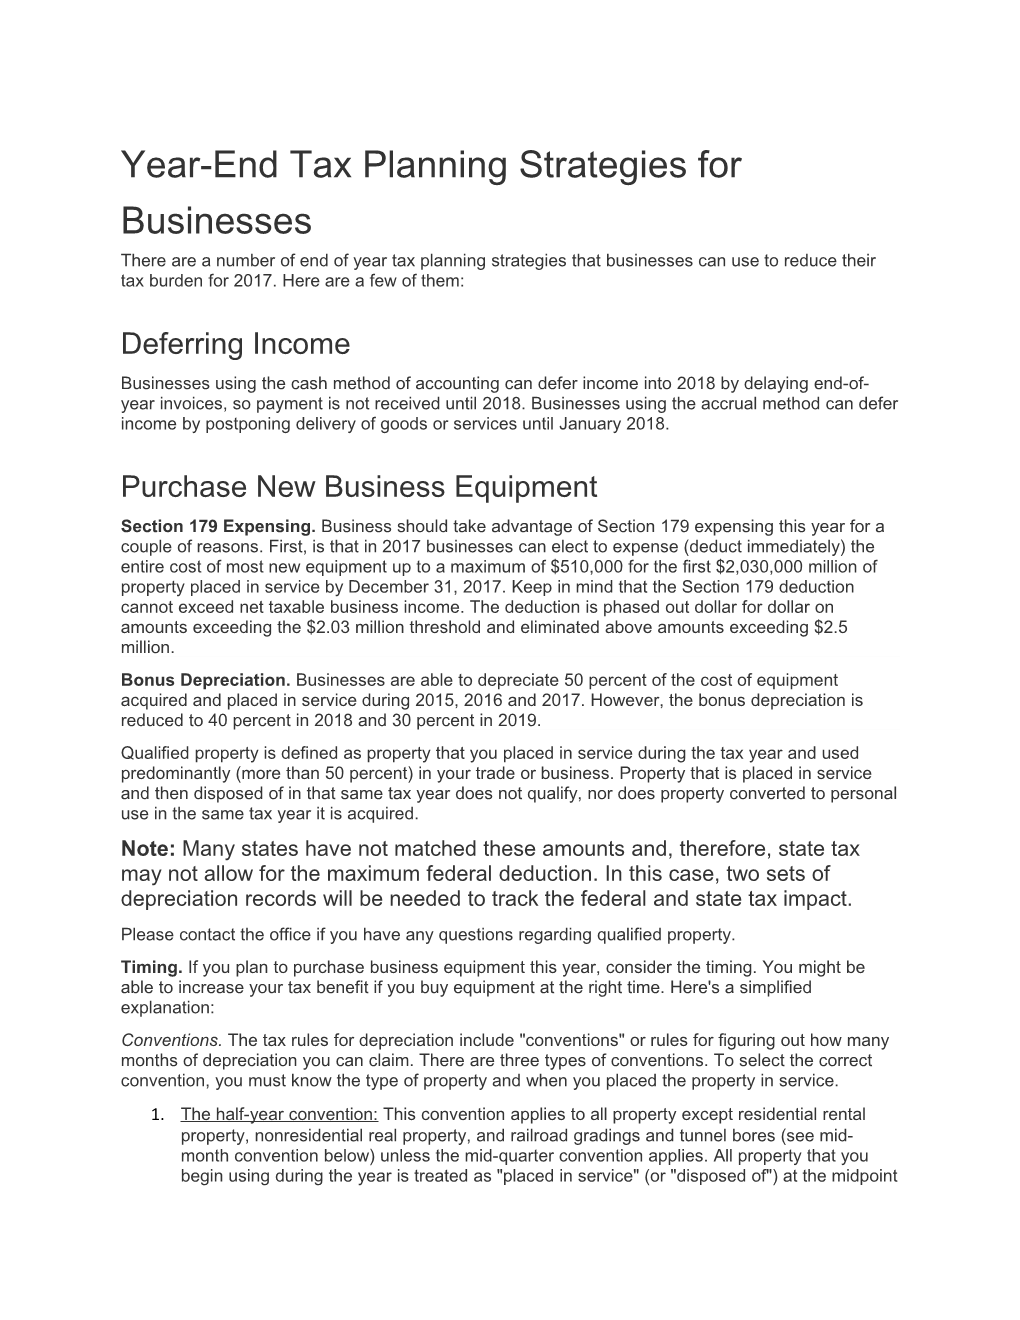 Year-End Tax Planning Strategies for Businesses